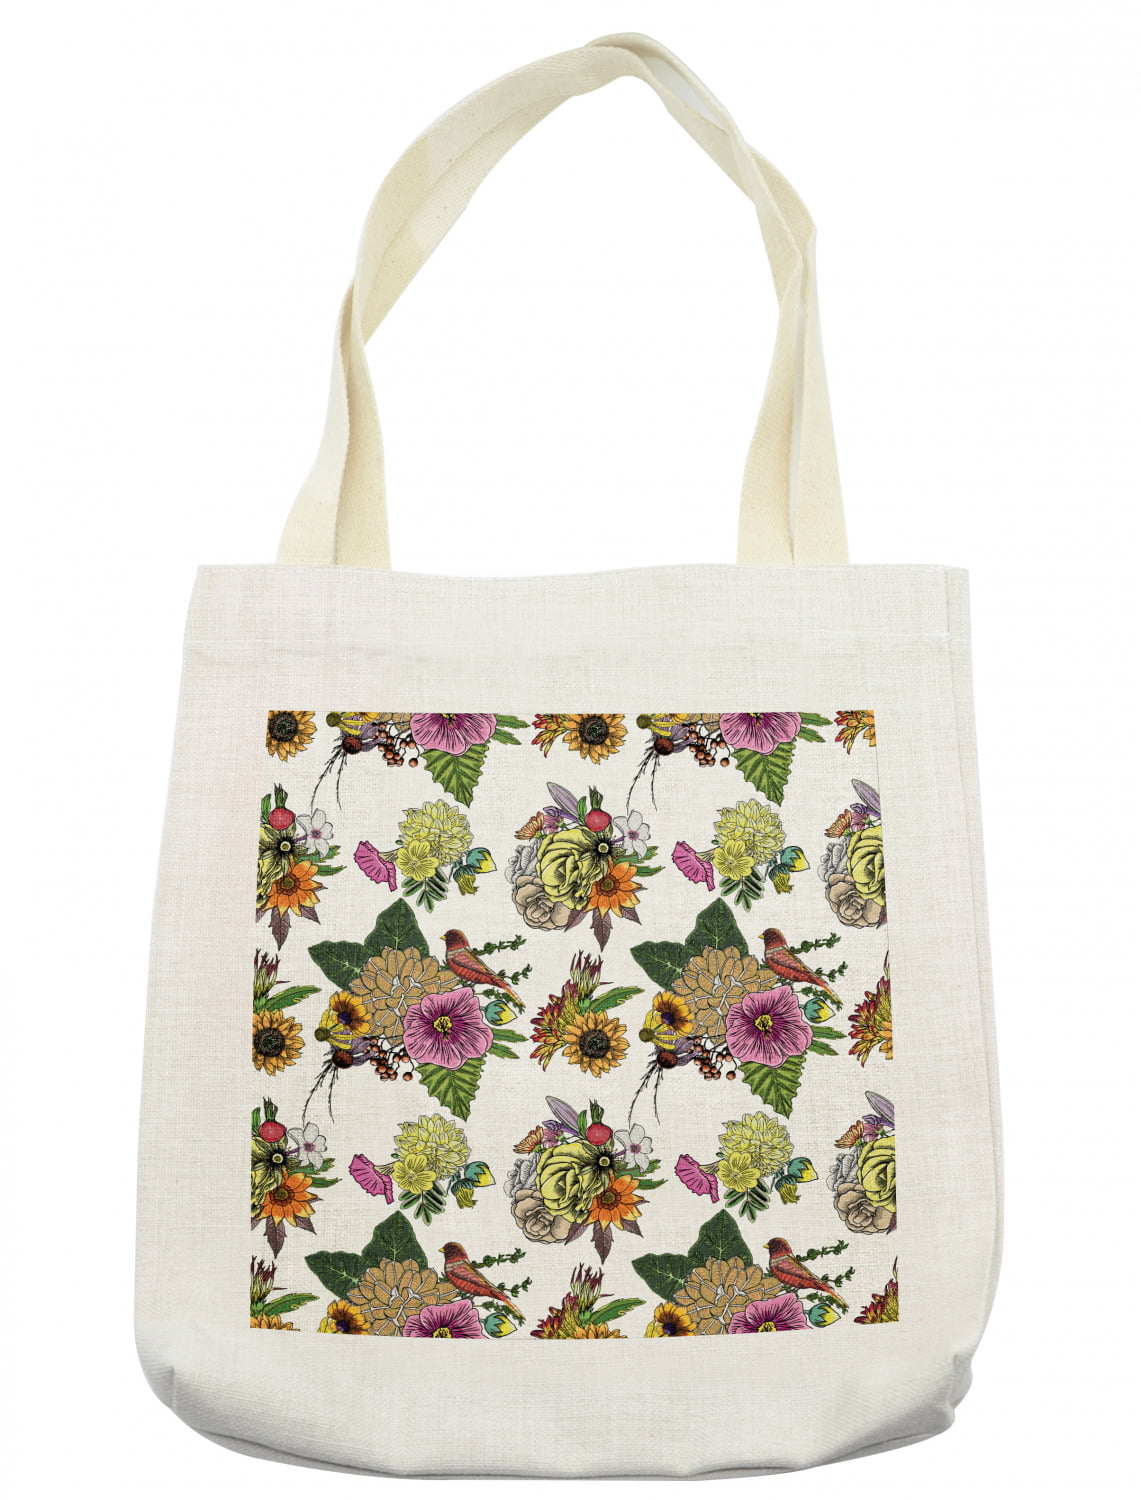 Botanical Tote Bag, Roses Dahlia Hibiscus with Leaves and Sunflowers ...